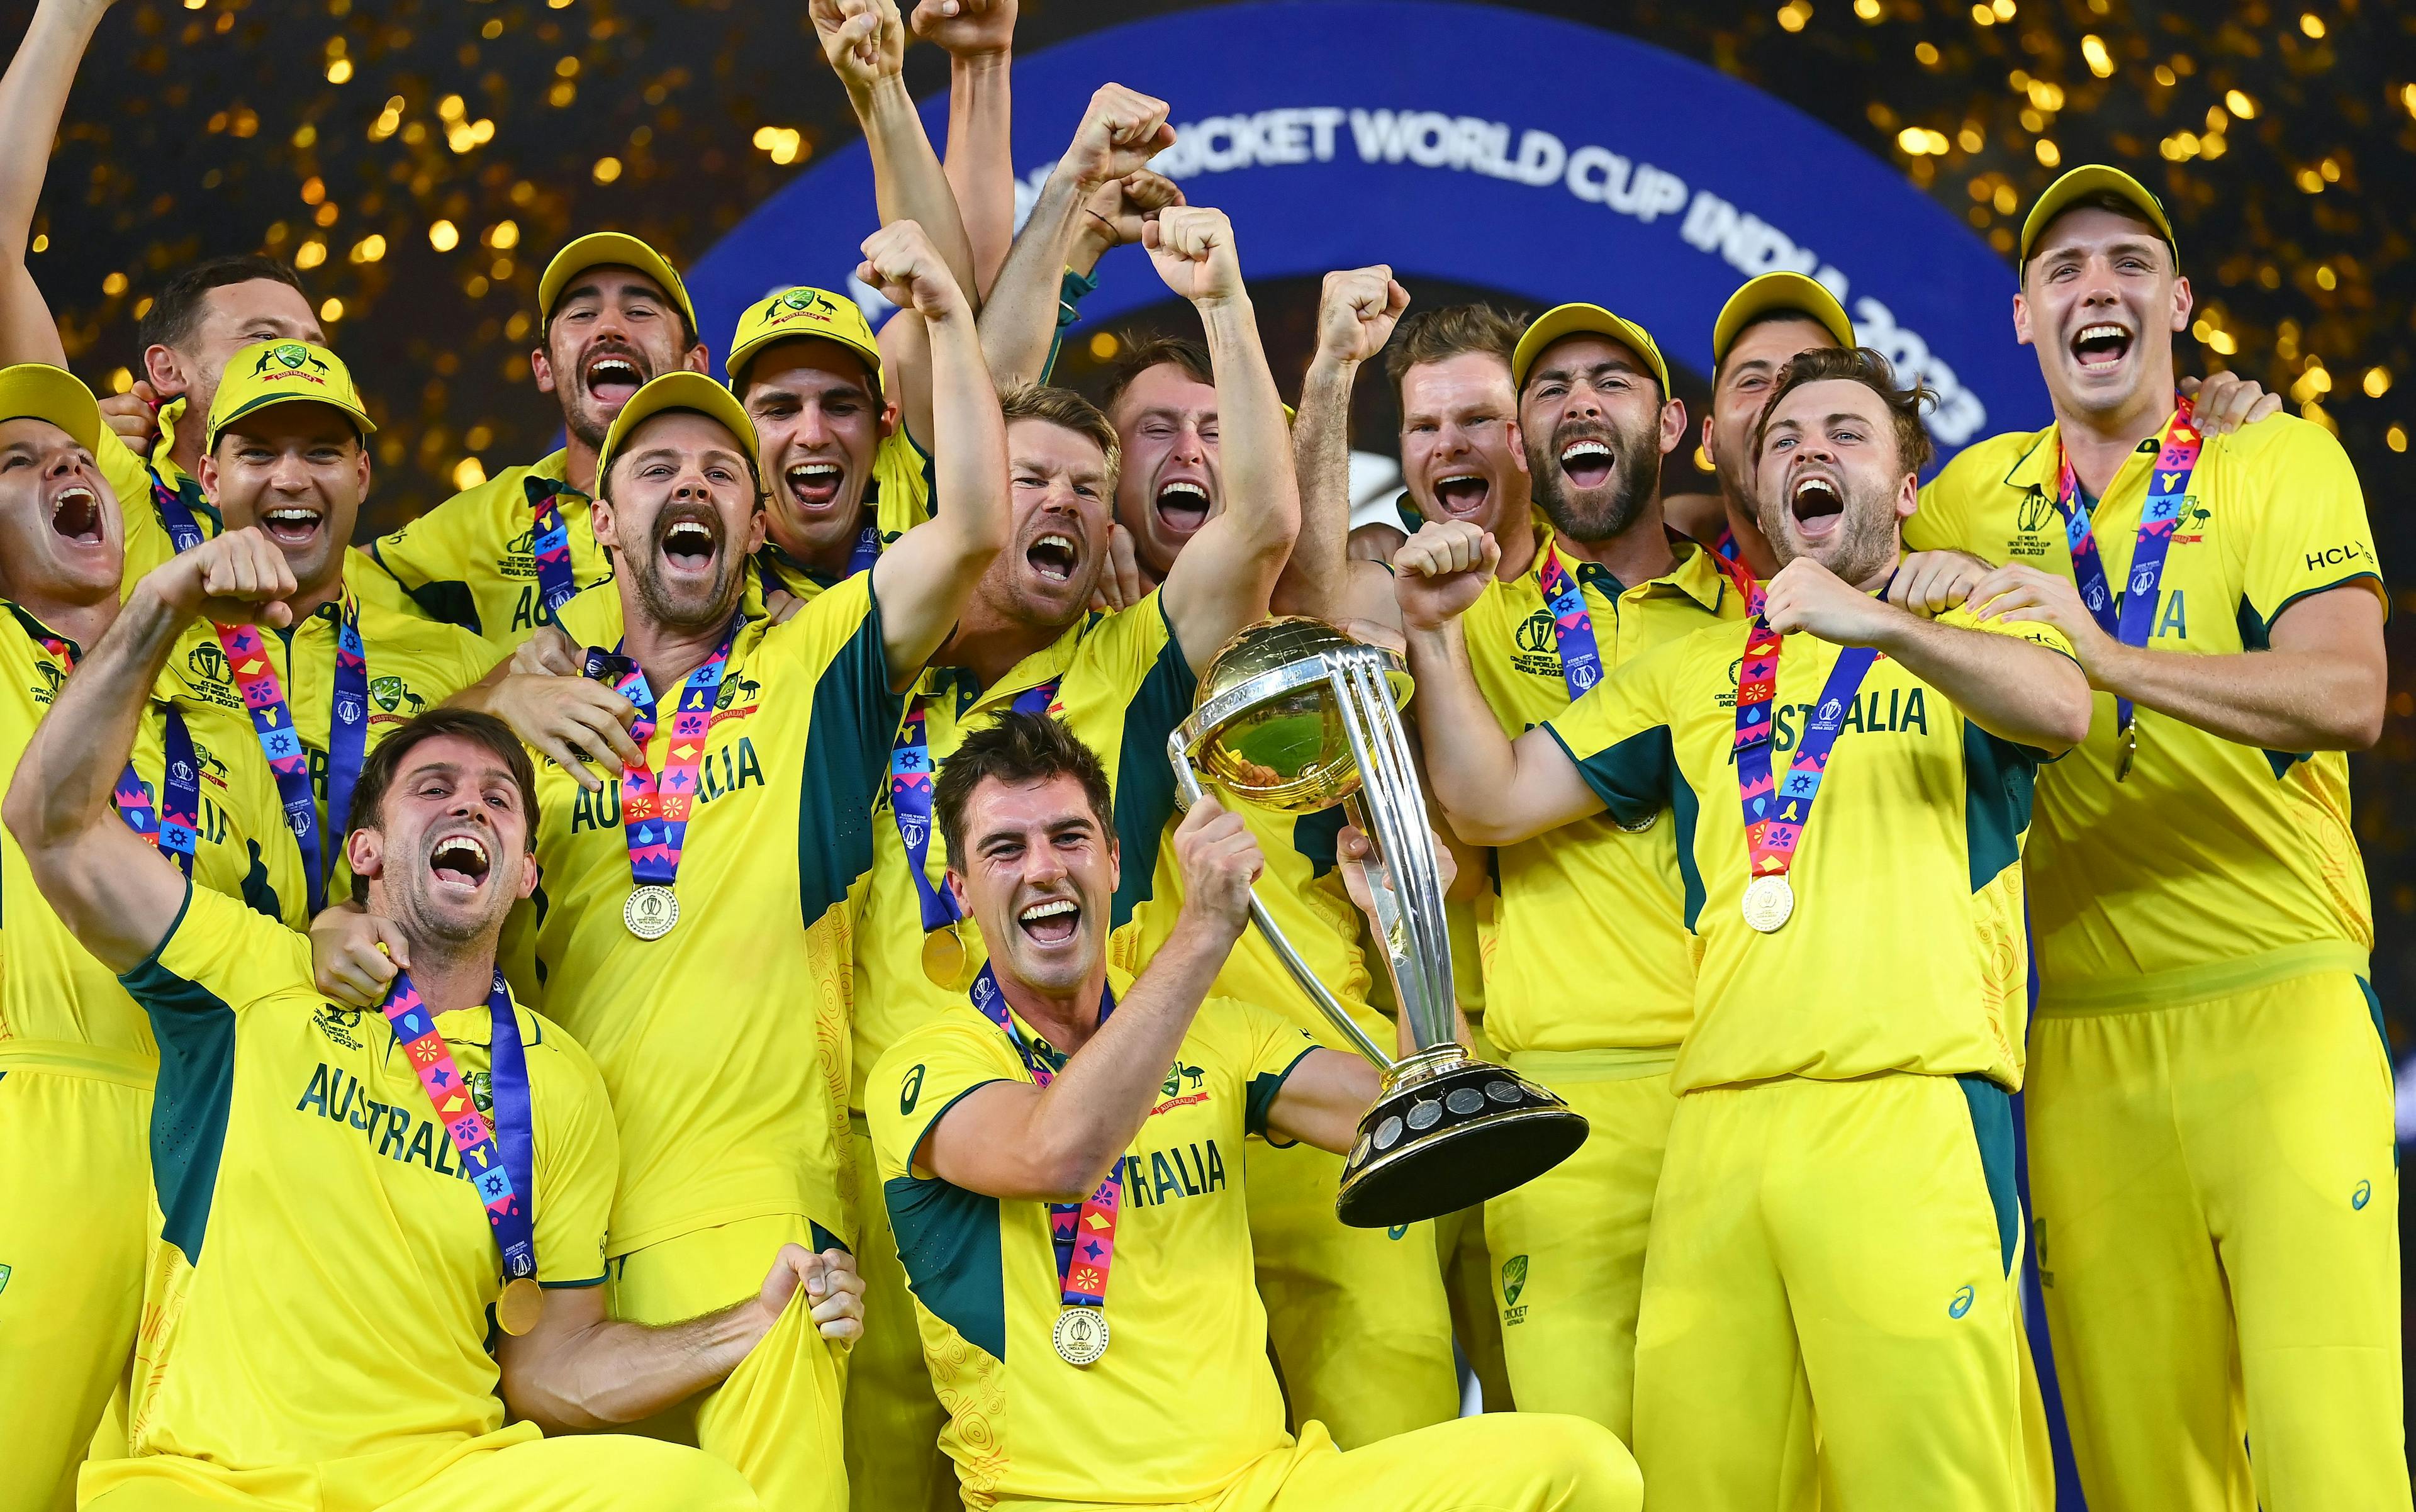 How Many World Cup Australia Won in Cricket